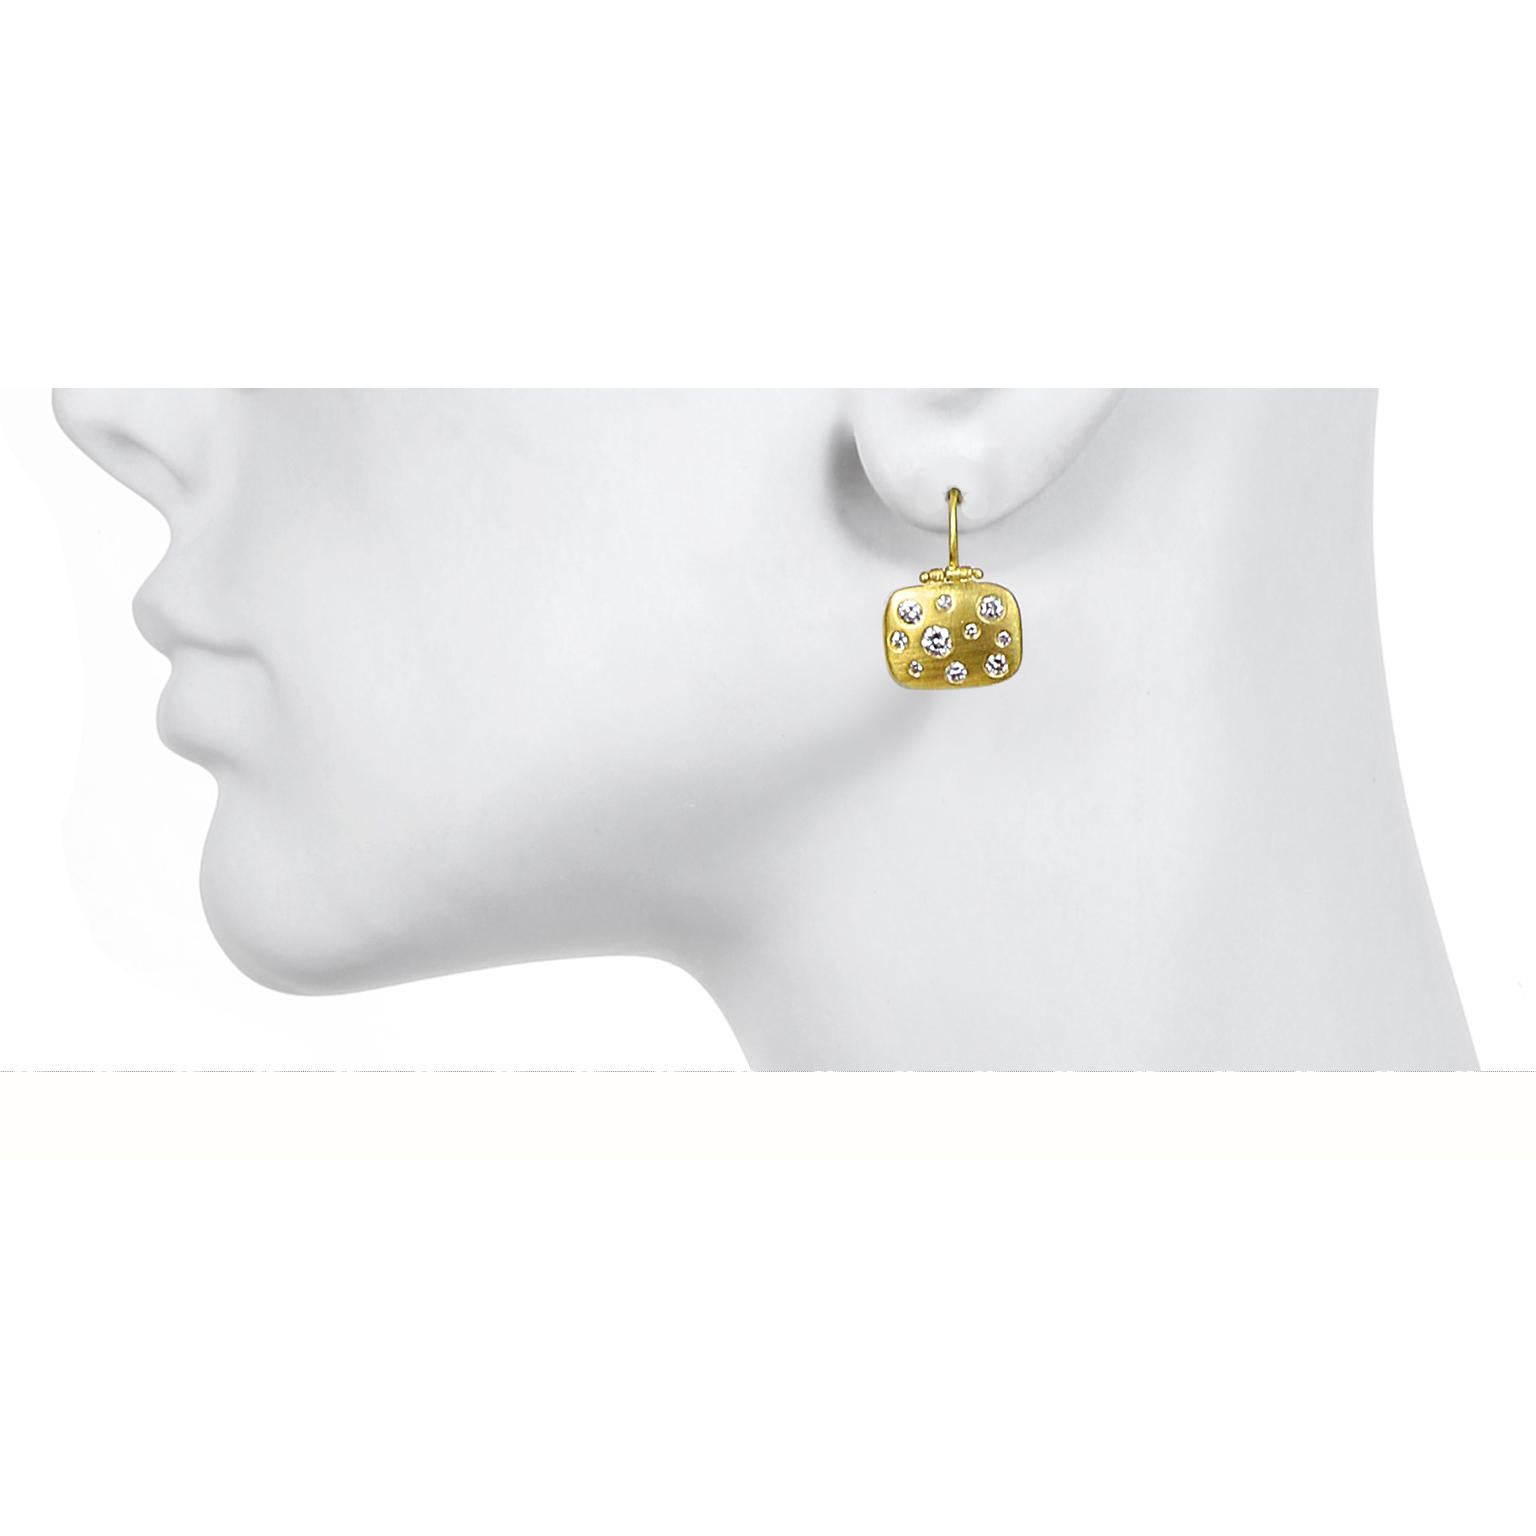 Faye Kim 18 Karat Gold Diamond Chiclet Hinged Earrings

The quintessential perfect pair of diamond earrings.  Just enough sparkle to get noticed but with understated elegance.  From board room decision making to brunch with friends.  These earrings